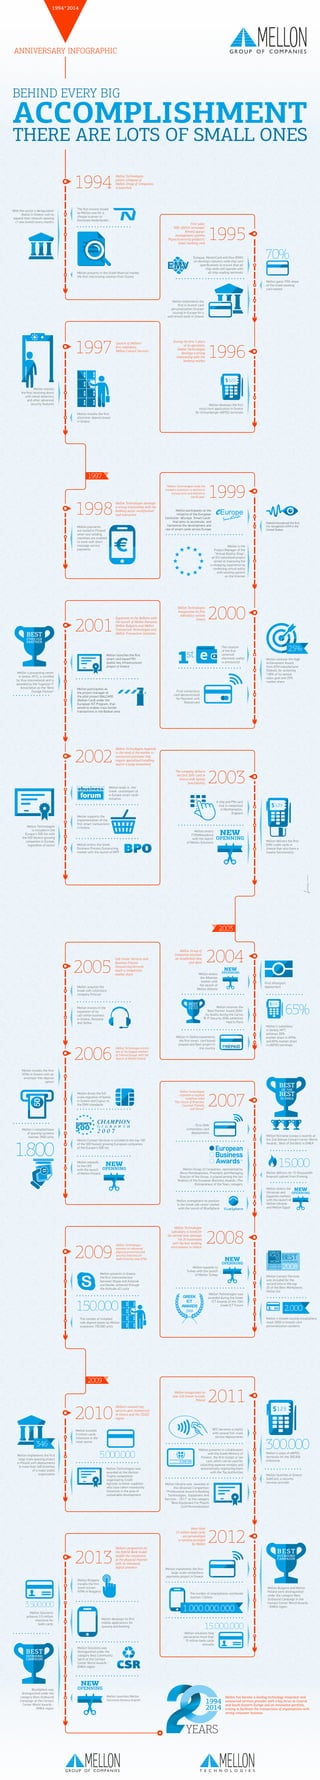 Mellon 20 years infographic